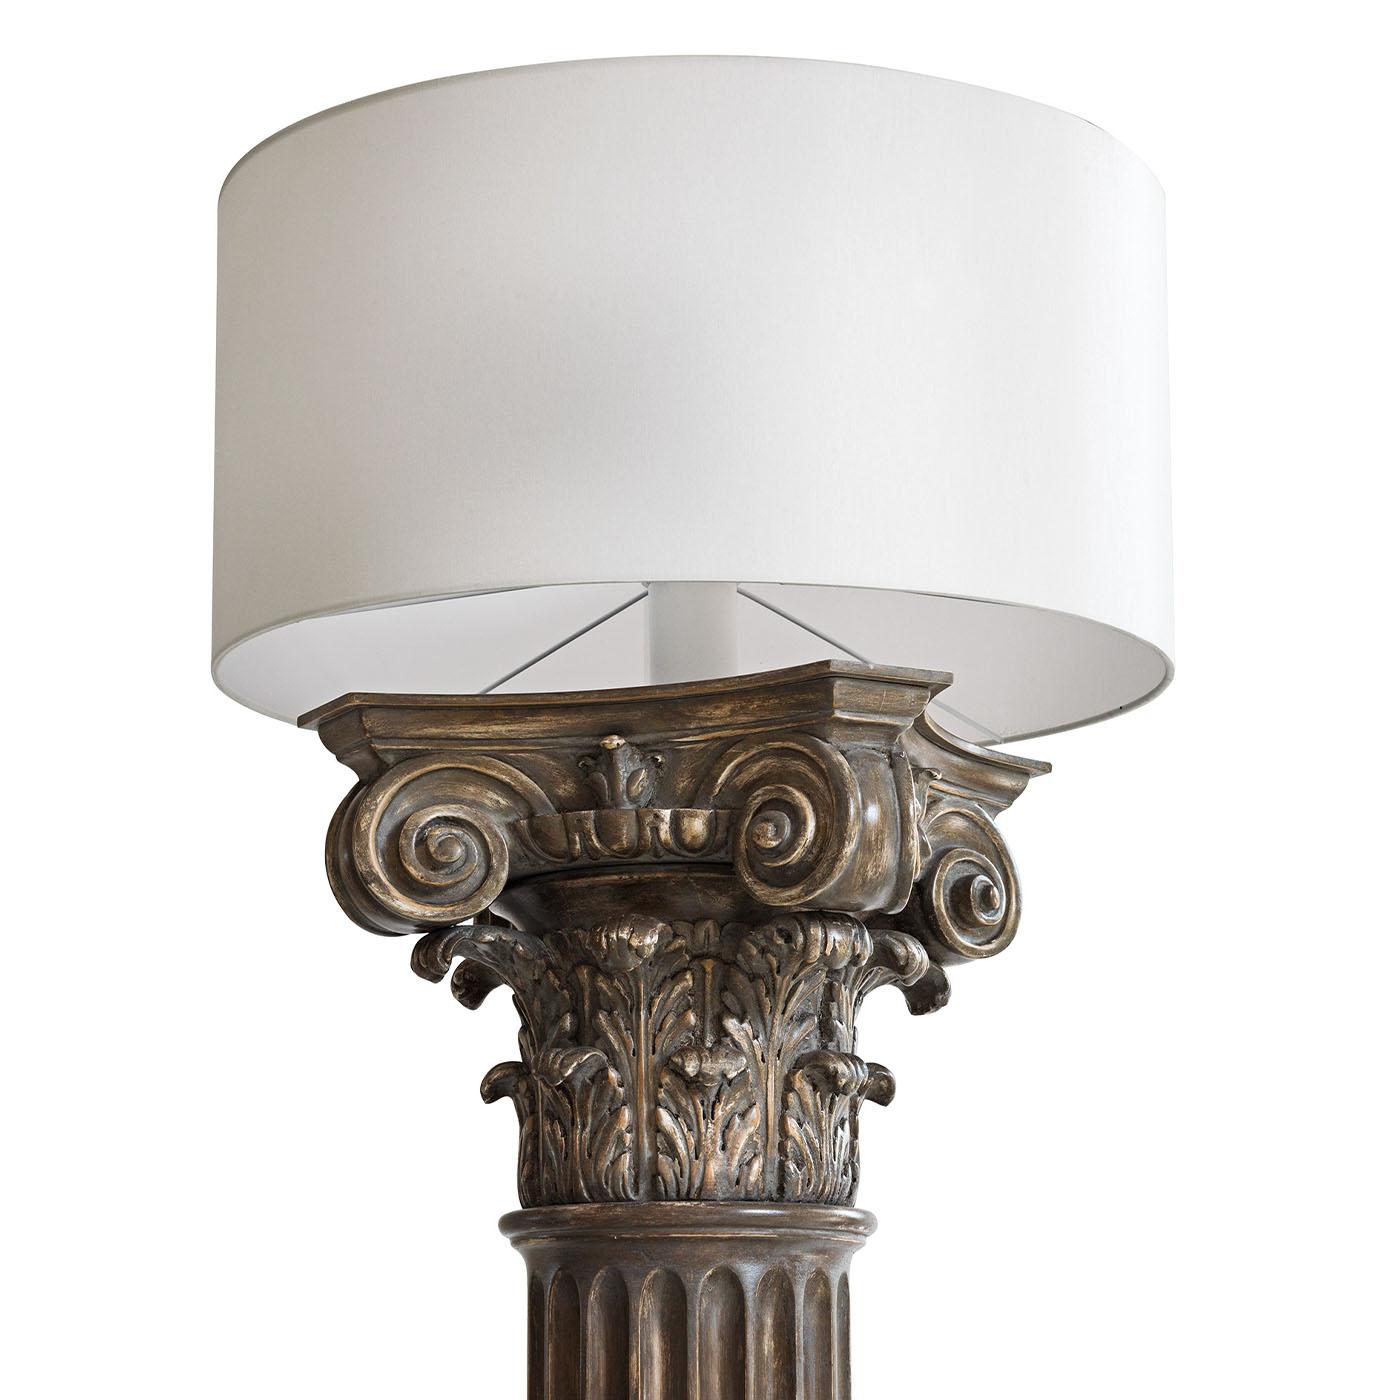 This column lamp, handcrafted from high-quality wood, is perfect for any location and capable of enhancing any decor.